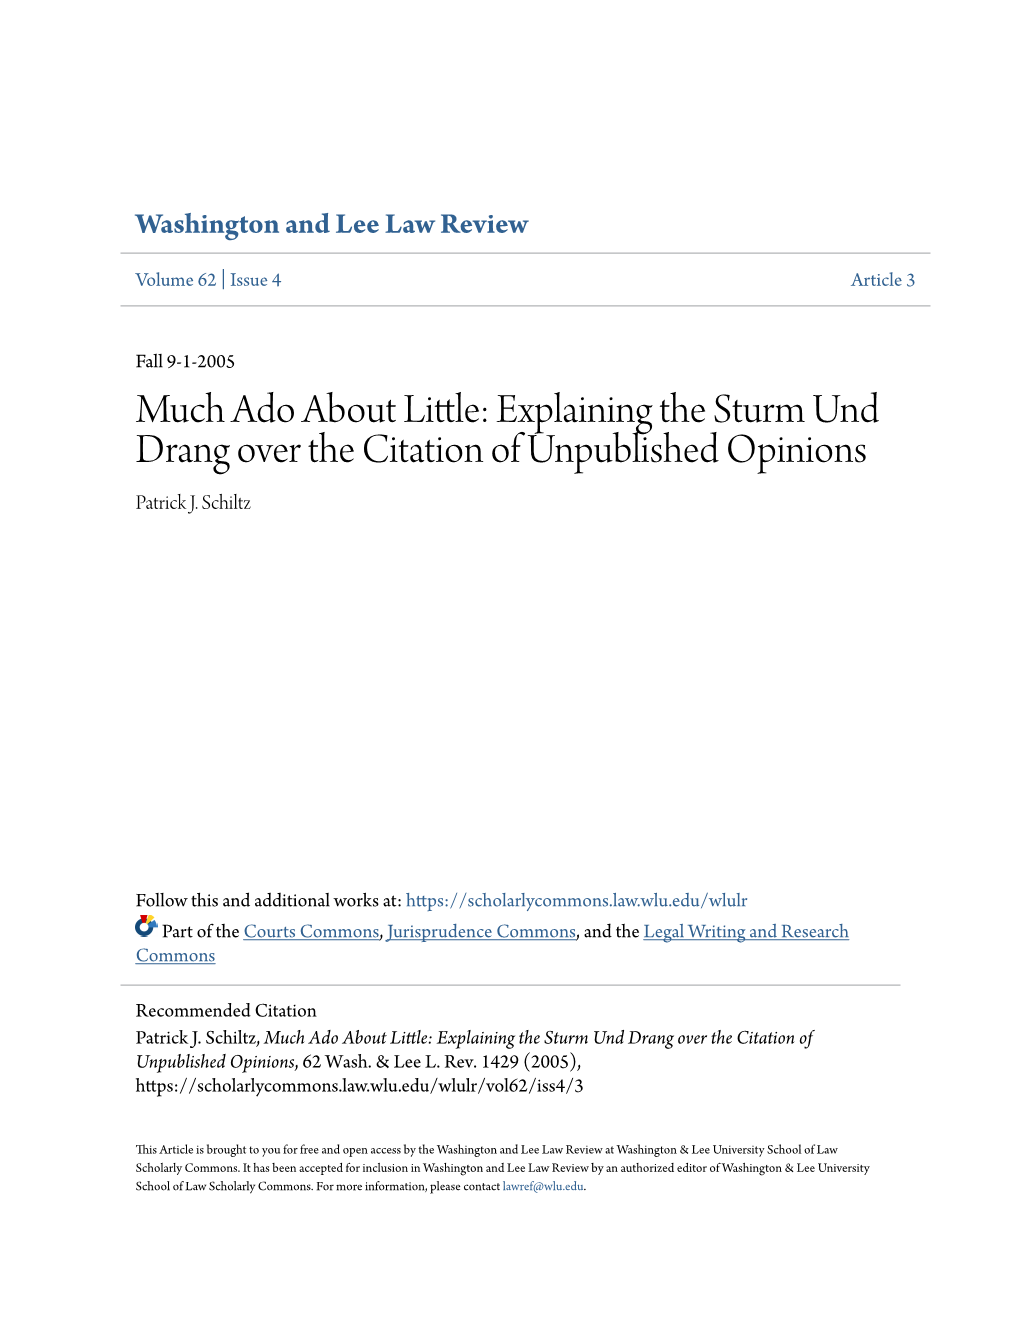 Explaining the Sturm Und Drang Over the Citation of Unpublished Opinions Patrick J